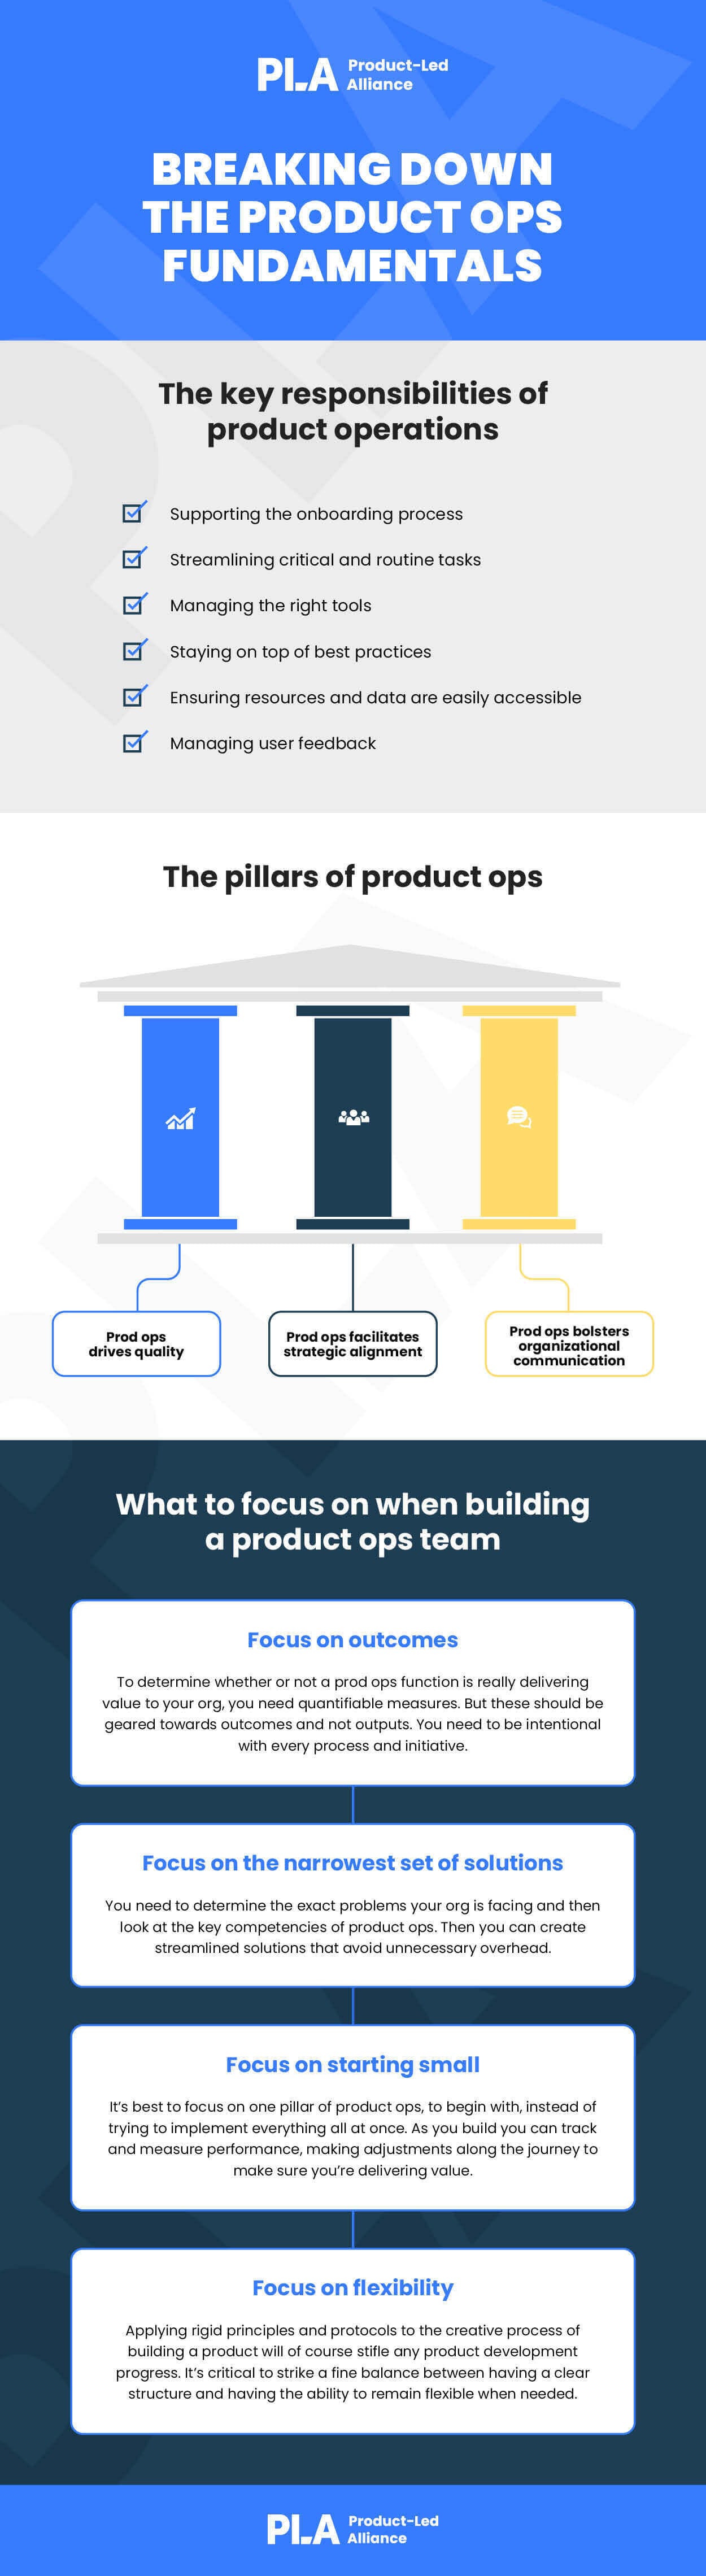 The key pillars of product operations (product ops)